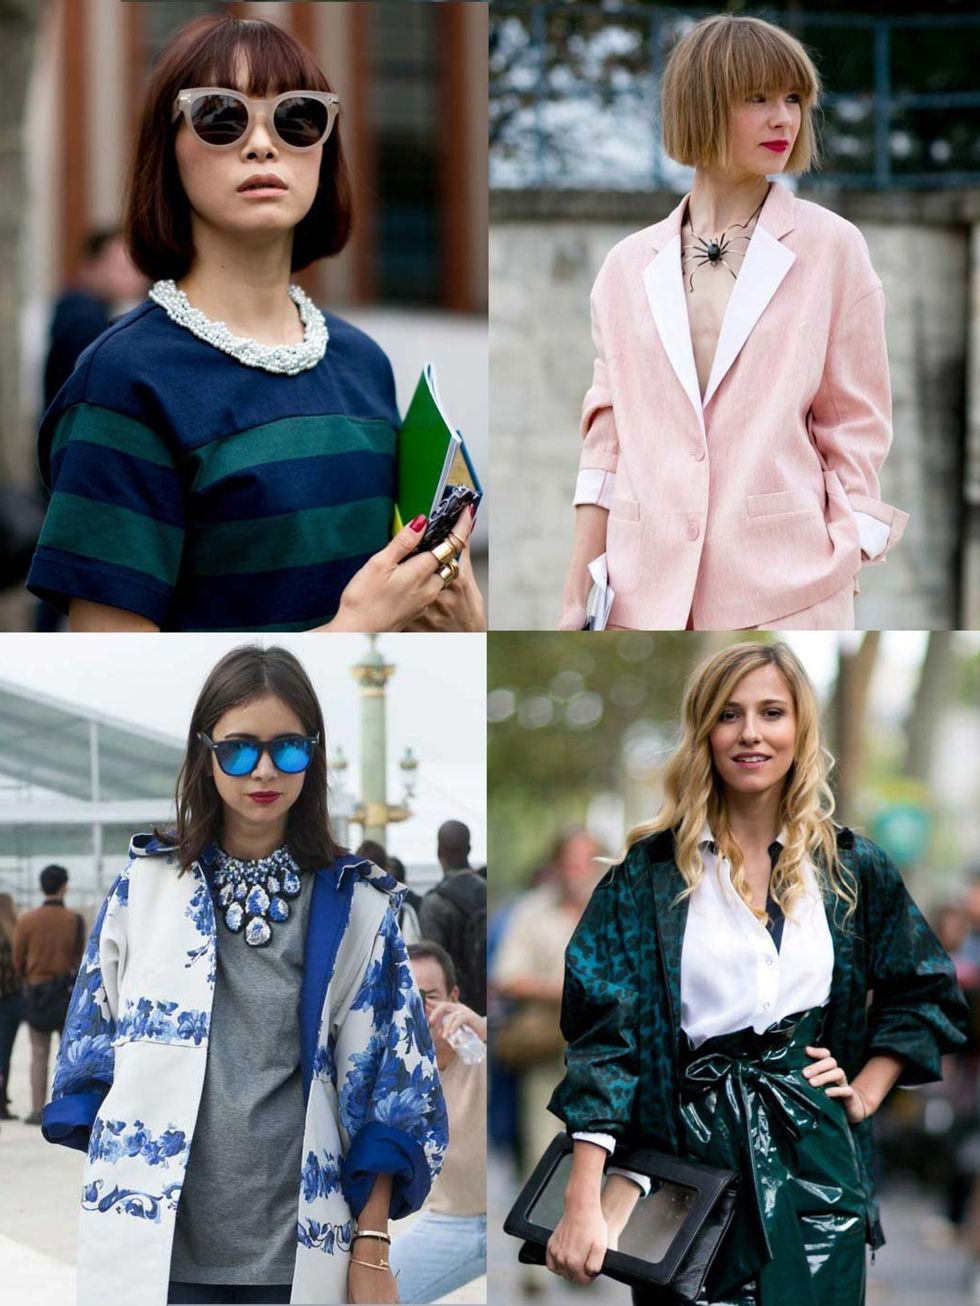 <p>Even as the last model walked the runway at <a href="http://www.elleuk.com/style/street-style/paris-fashion-week-street-style">Paris Fashion Week</a>, the peoples costume drama raged on. Raising the bar with their high pattern, colour-clashing separat